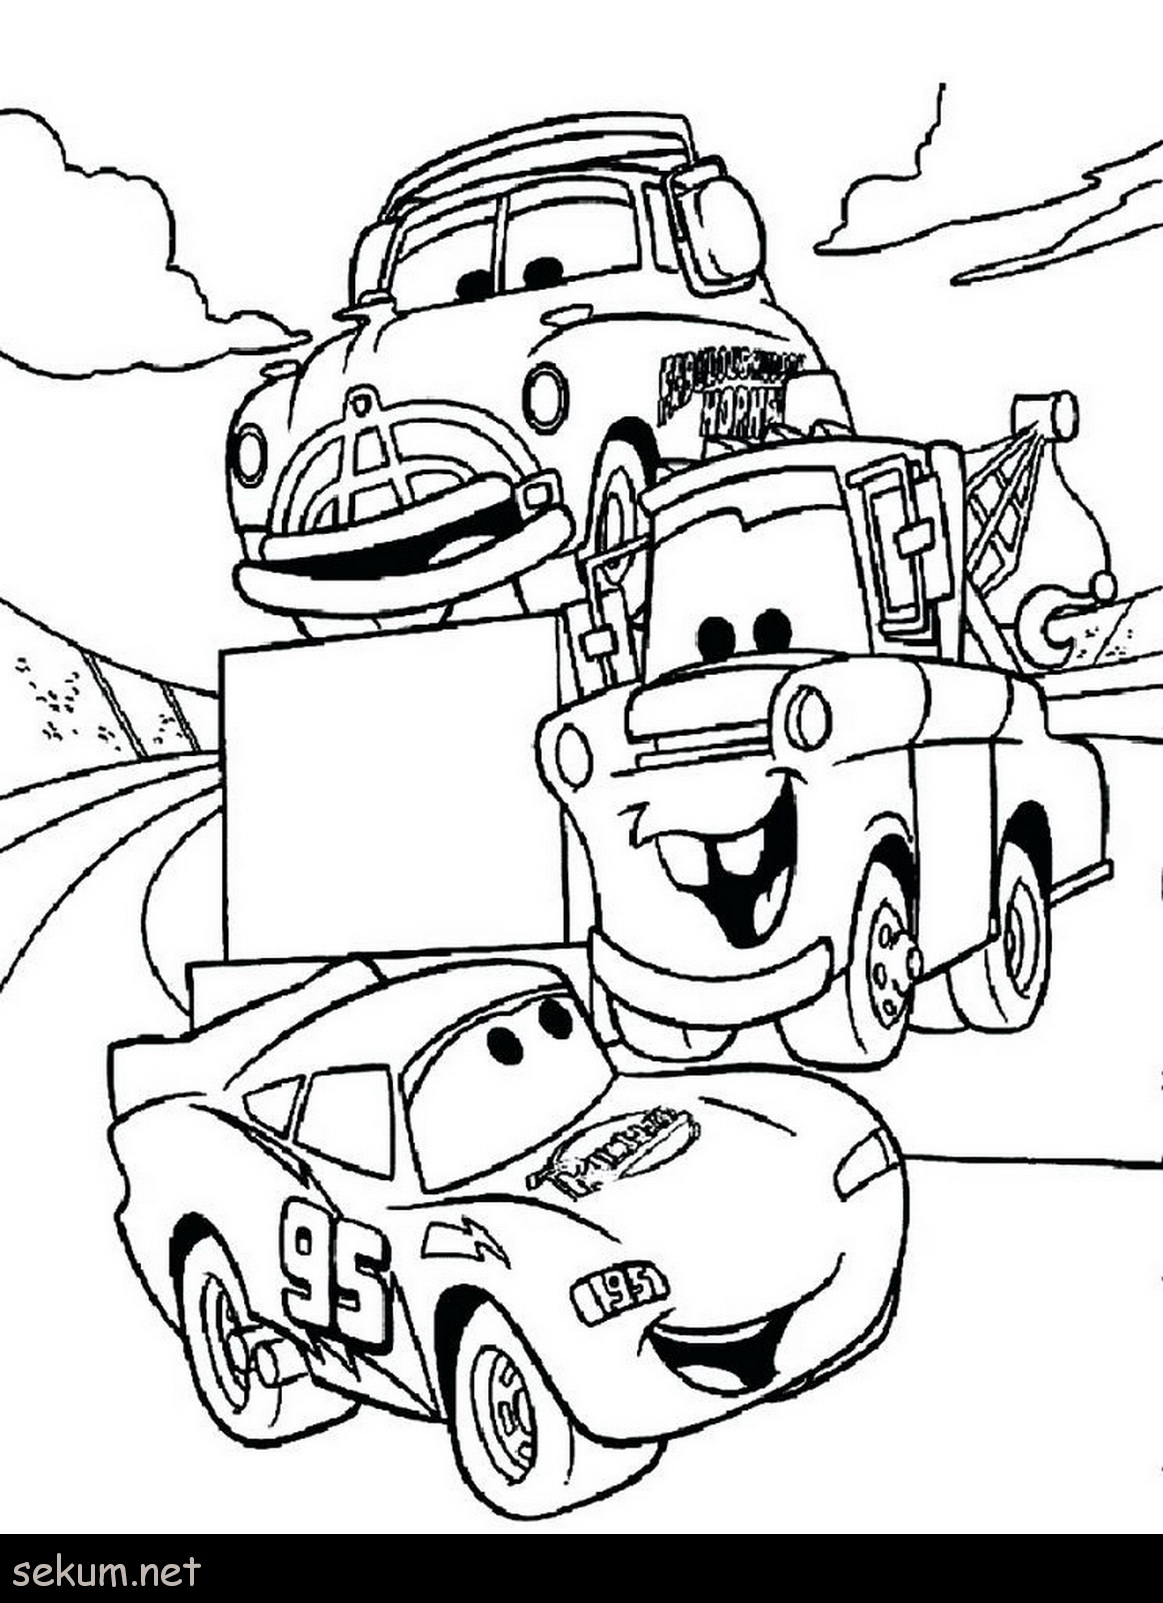 Printable Coloring Pages Cars Coloring Pages Cars Printable Coloring Pages Patinsudouest